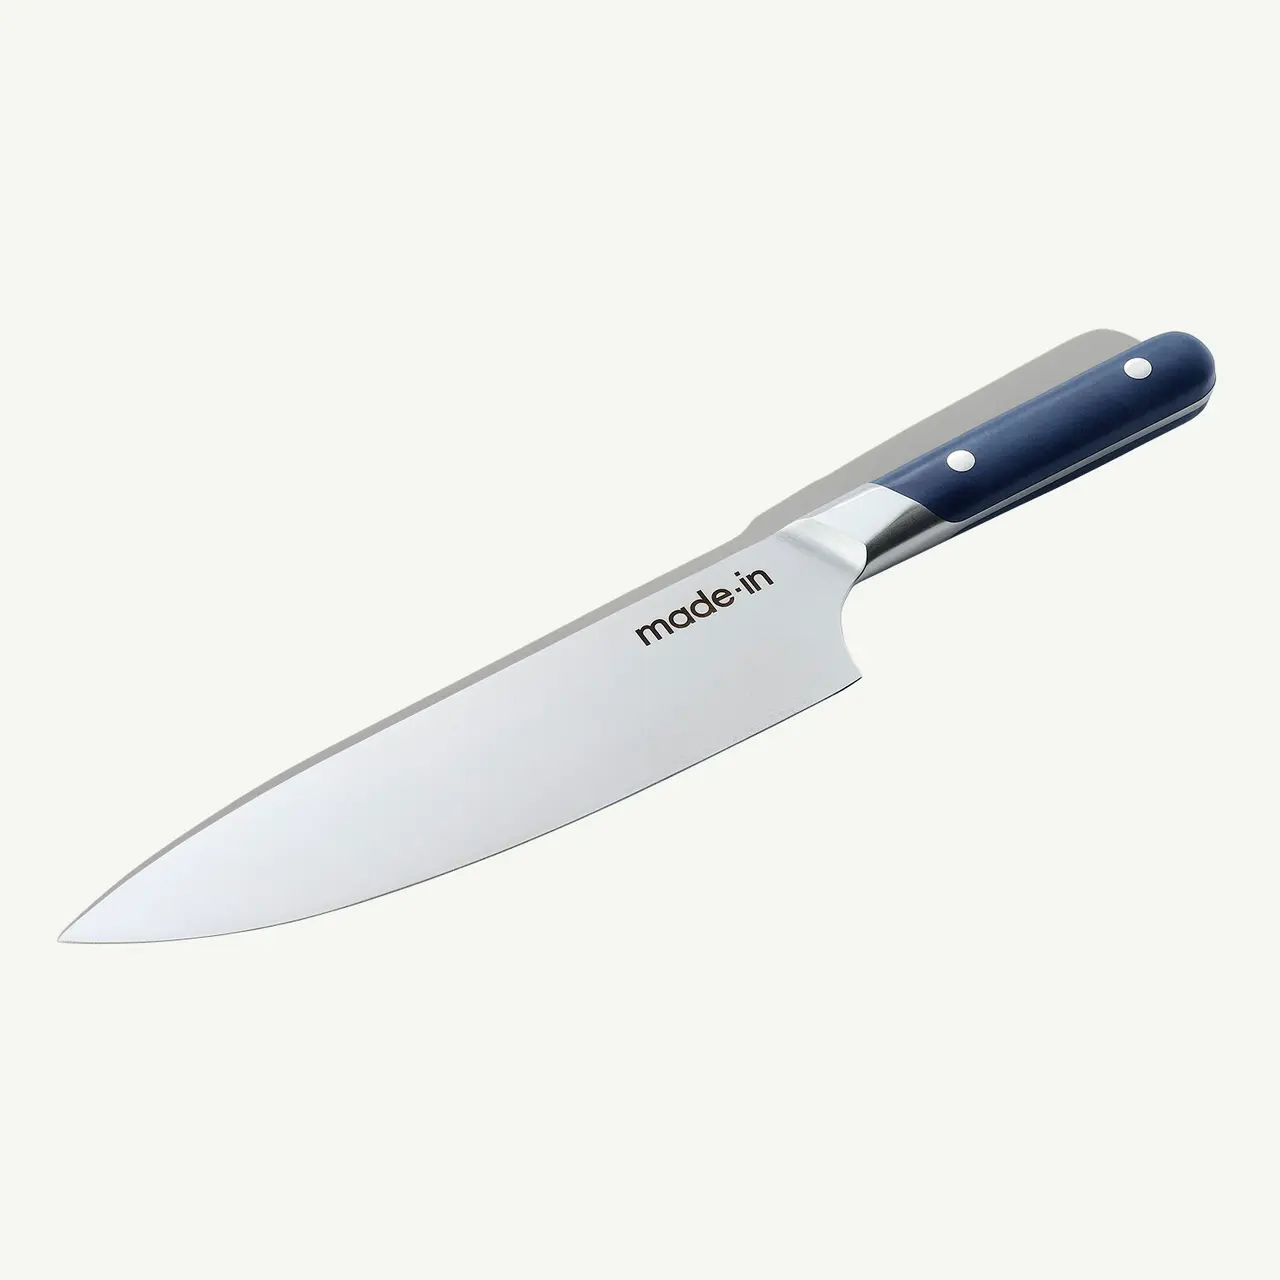 A stainless steel chef's knife with a black handle is displayed against a white background.